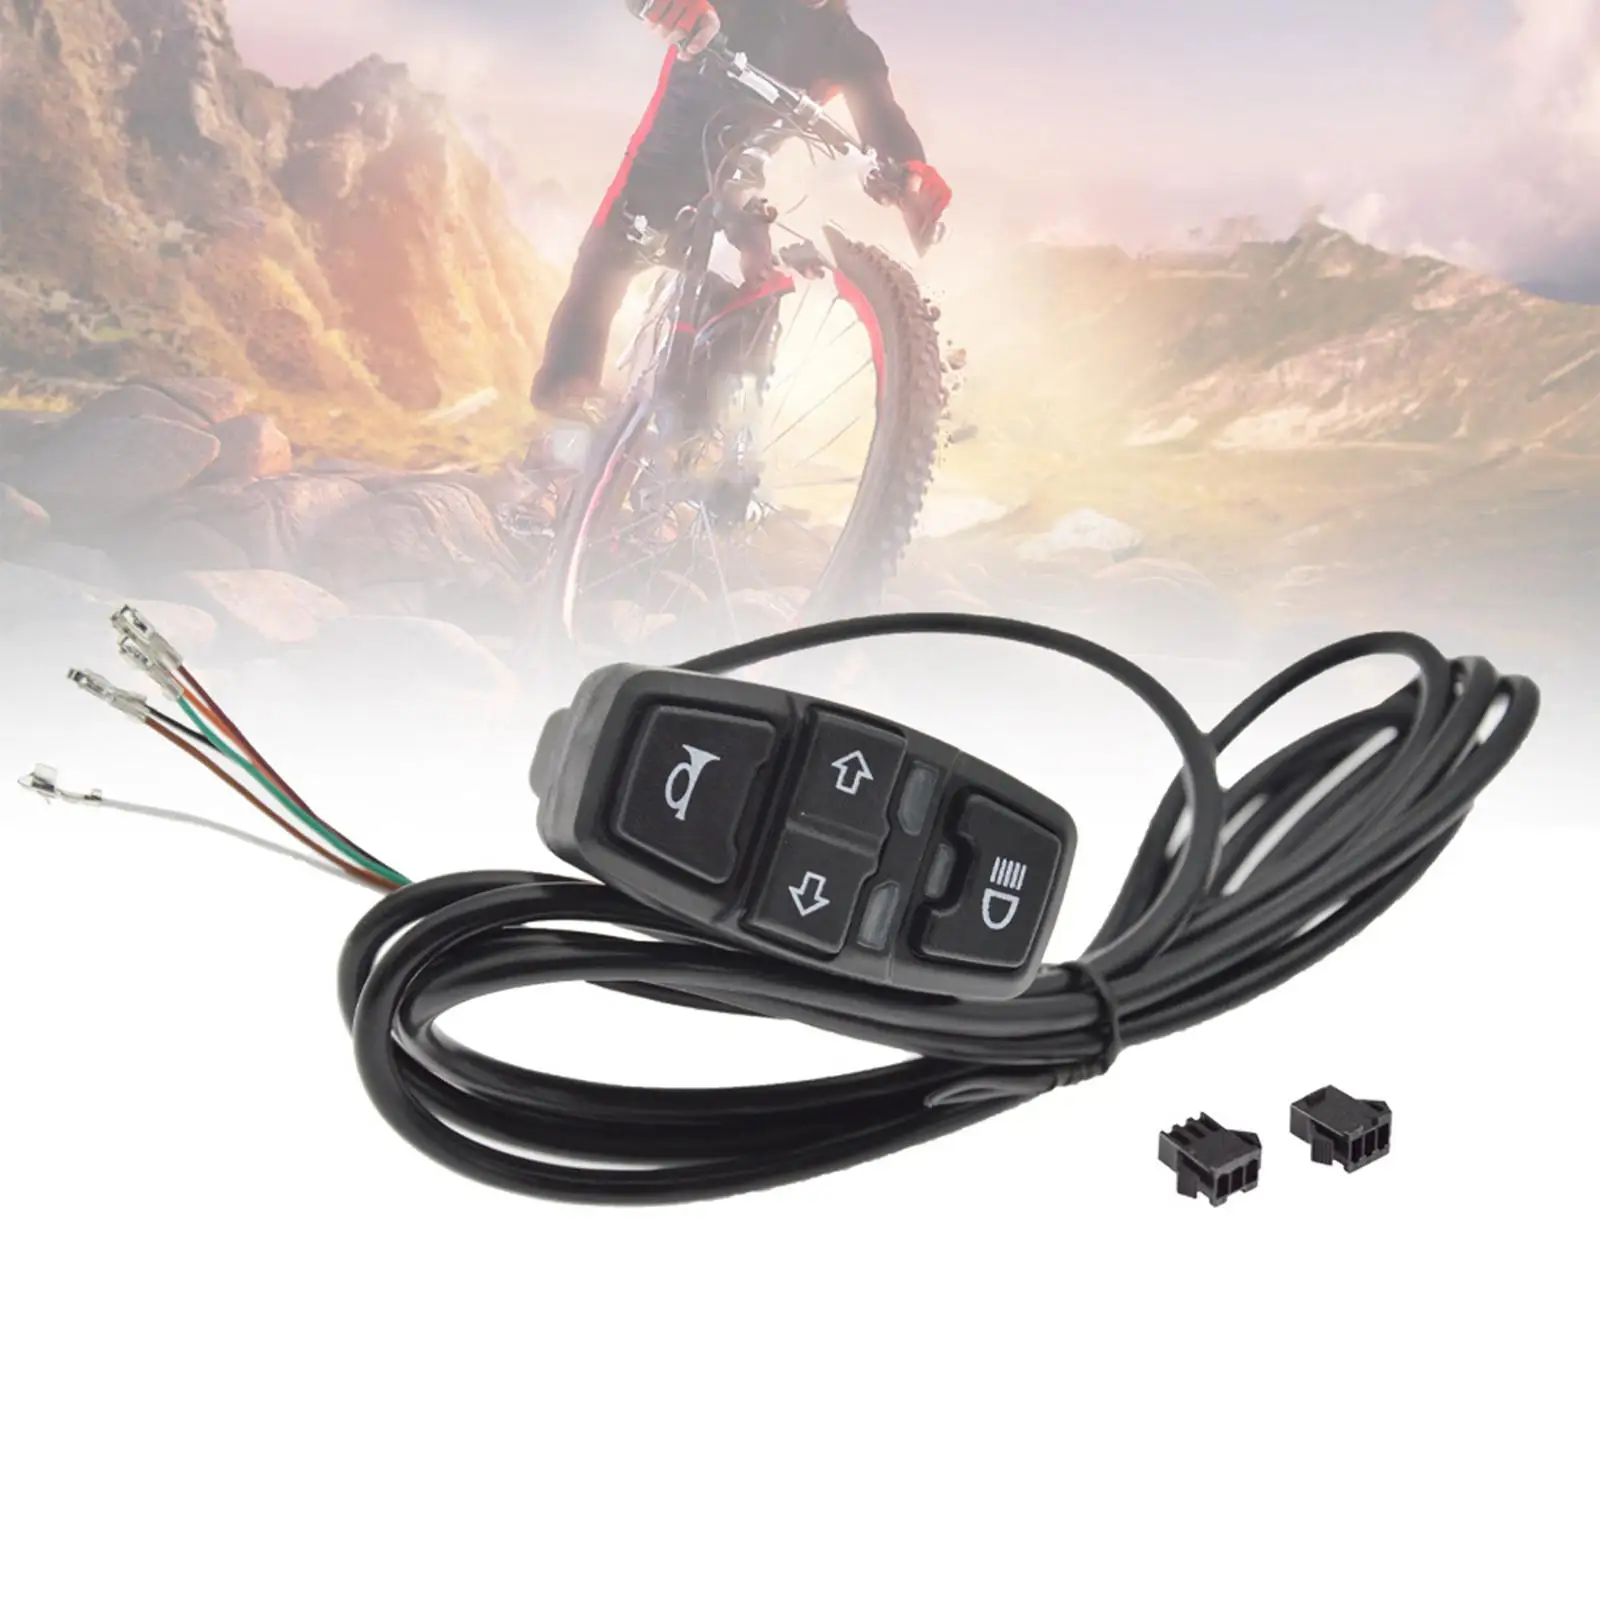 Frontlight Horn Cruise Turning Light Switch Bike Handlebar Grip Control Turn Signal Switch Knob for Motorcycle Electric Scooter